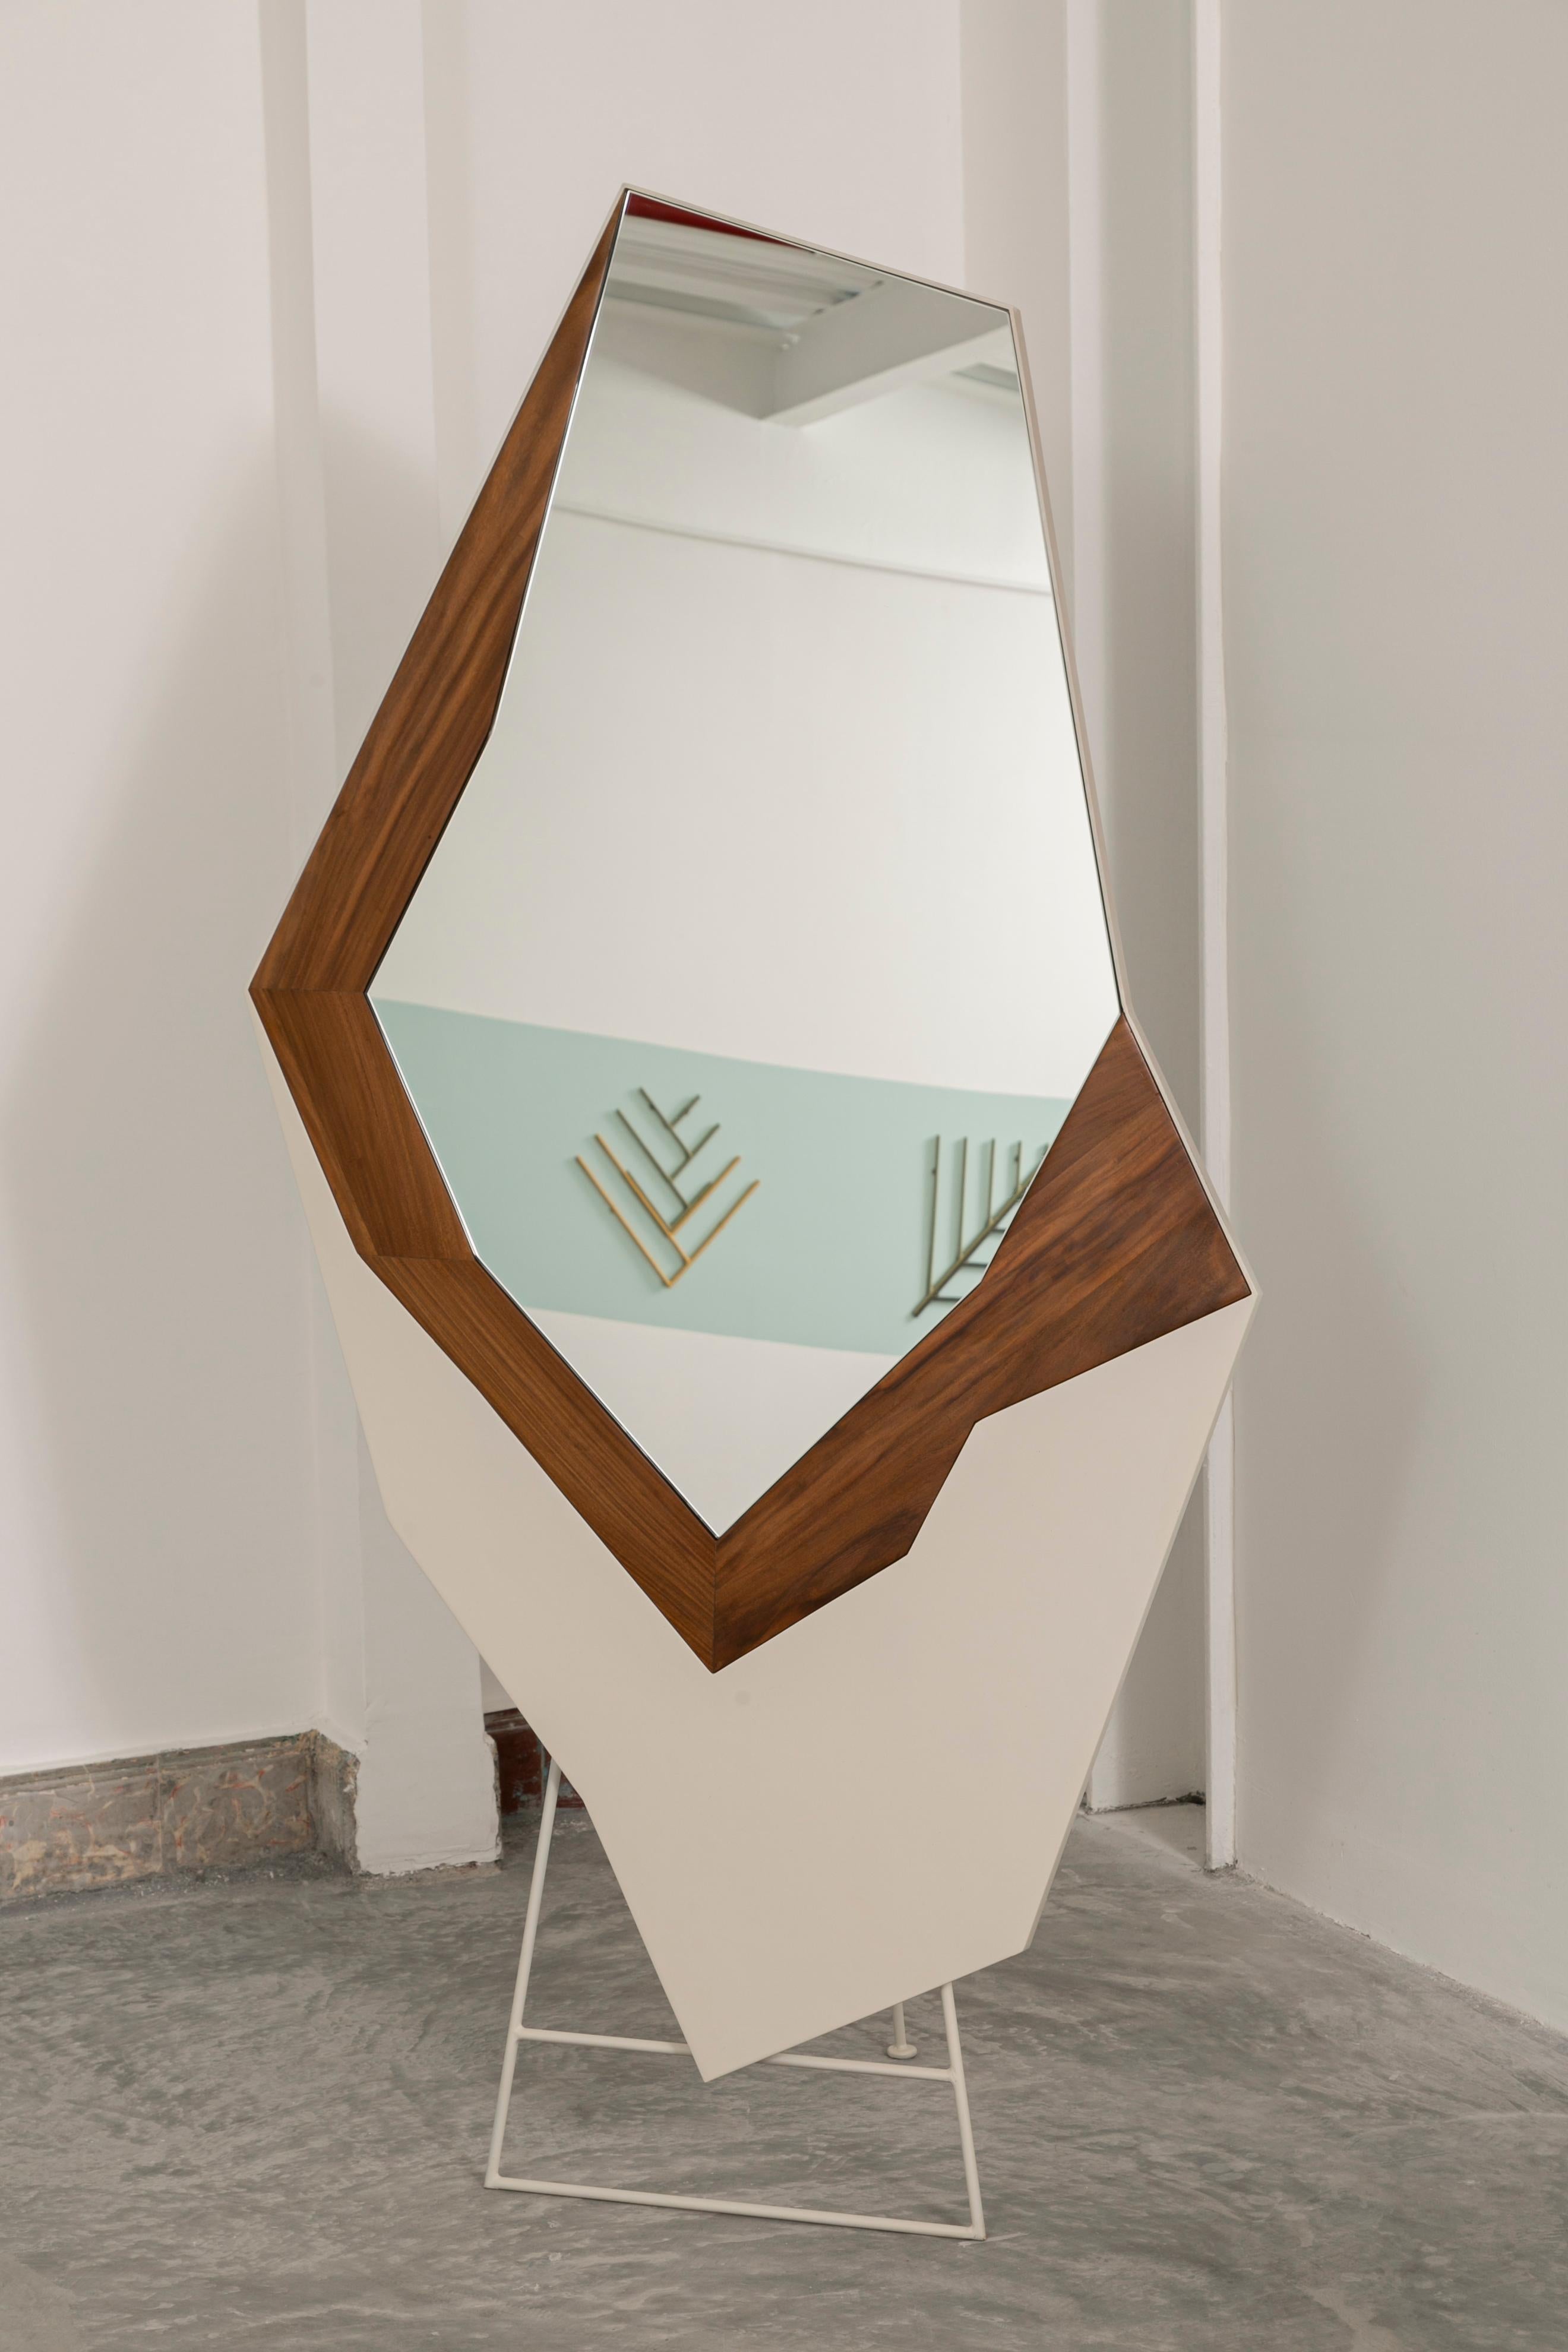 New Life Mirror - Tropical Depression, metal and wood handmade in Panama by Fi.

Tropical depression is a solo show by Fi - Sofi´a Alvarado (Panama, 1984).
In a pure state of consciousness, life is simple.
The understanding of the metaphor that the